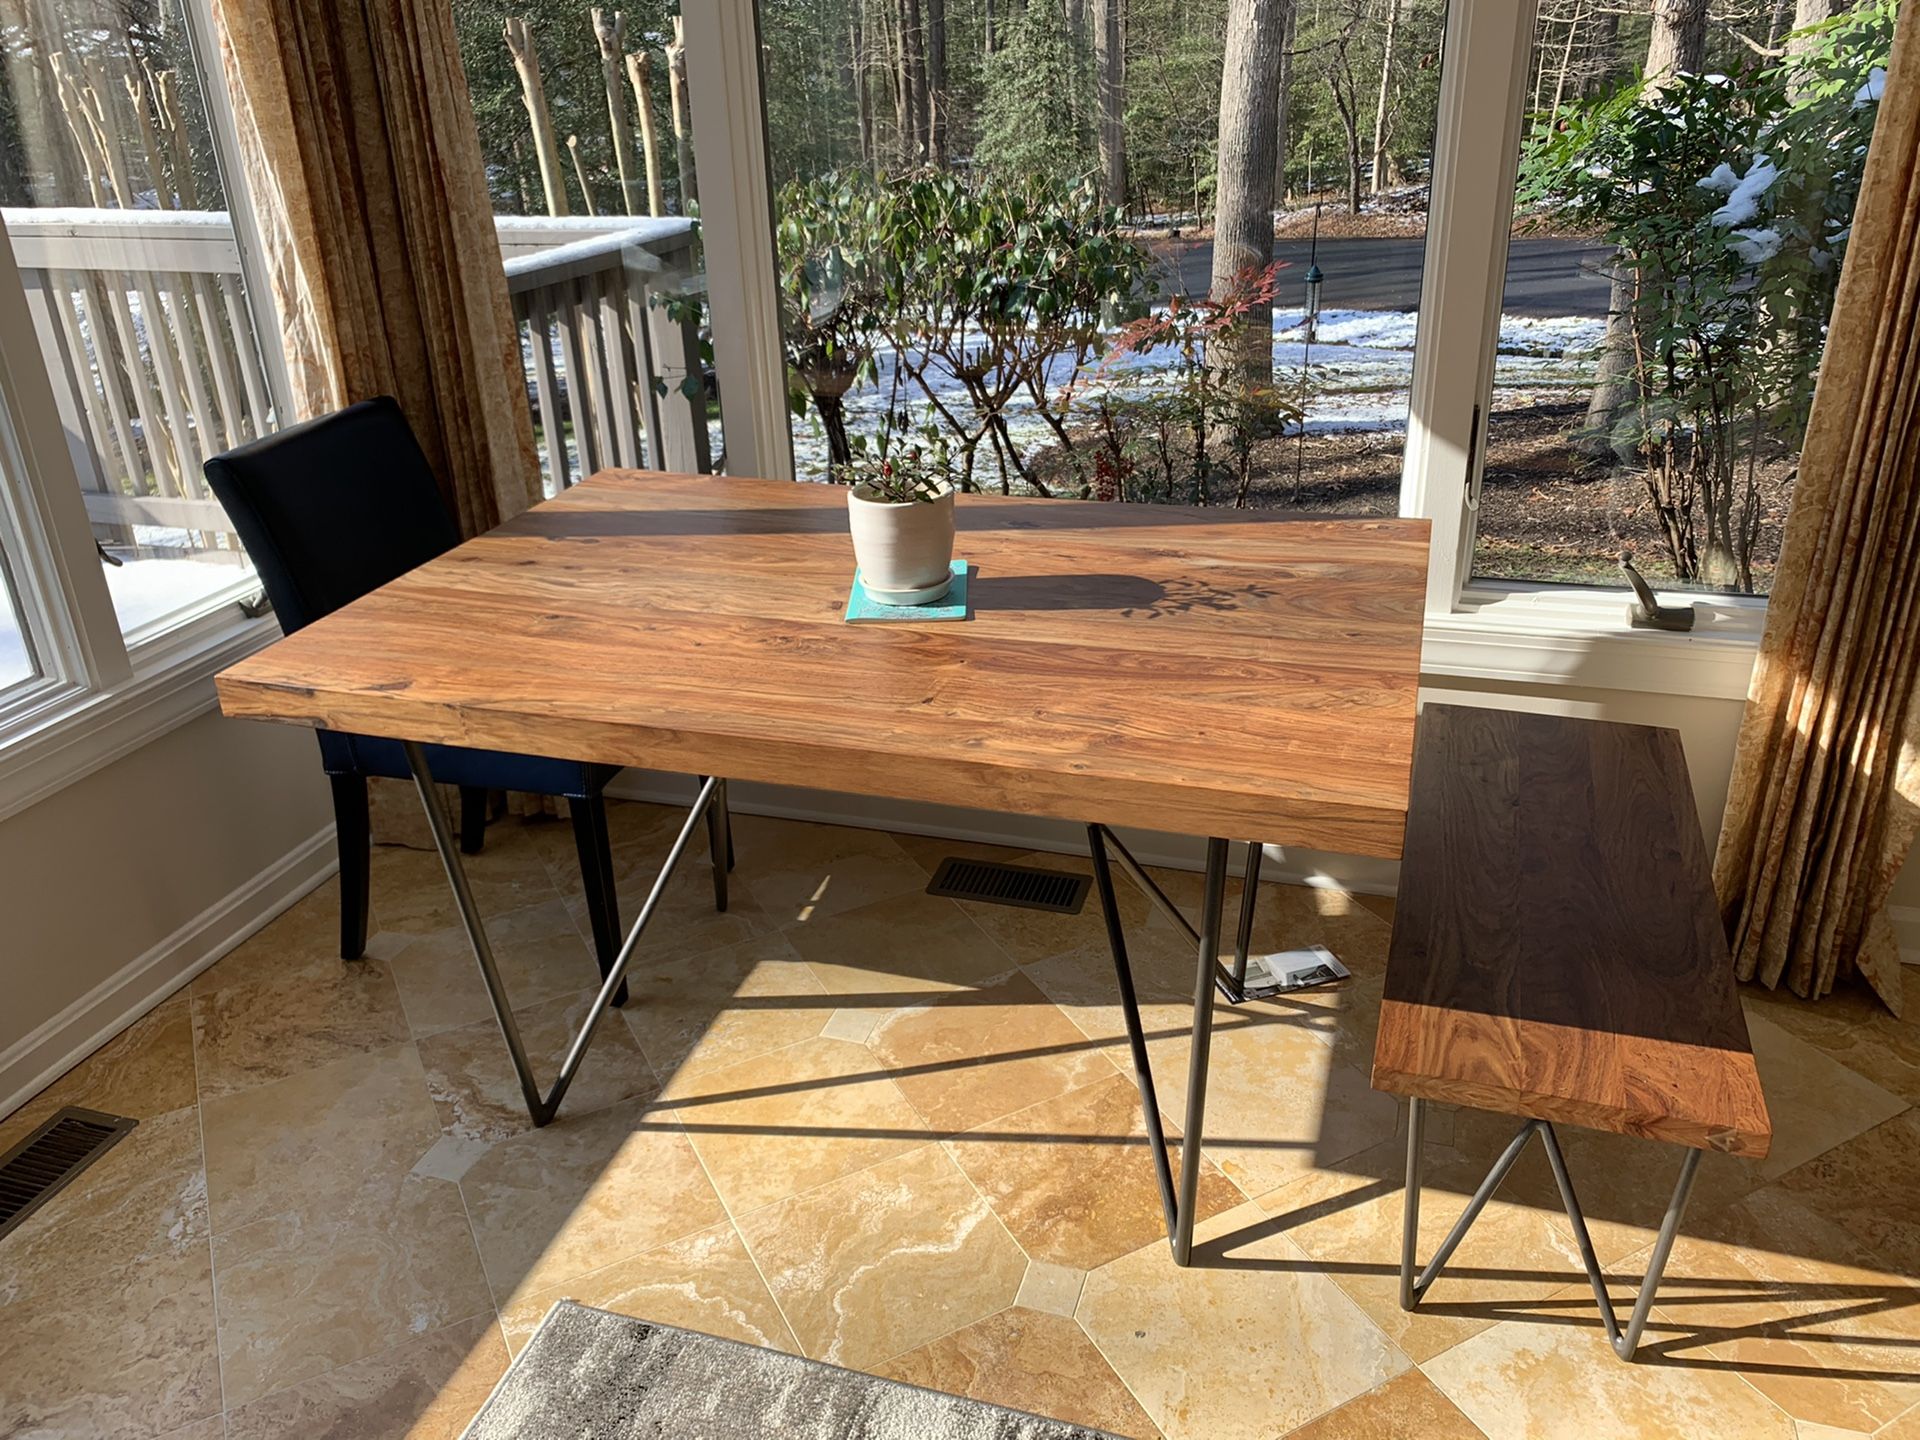 CB2 DYLAN 36"X53" DINING TABLE & 36” DYLAN BENCH